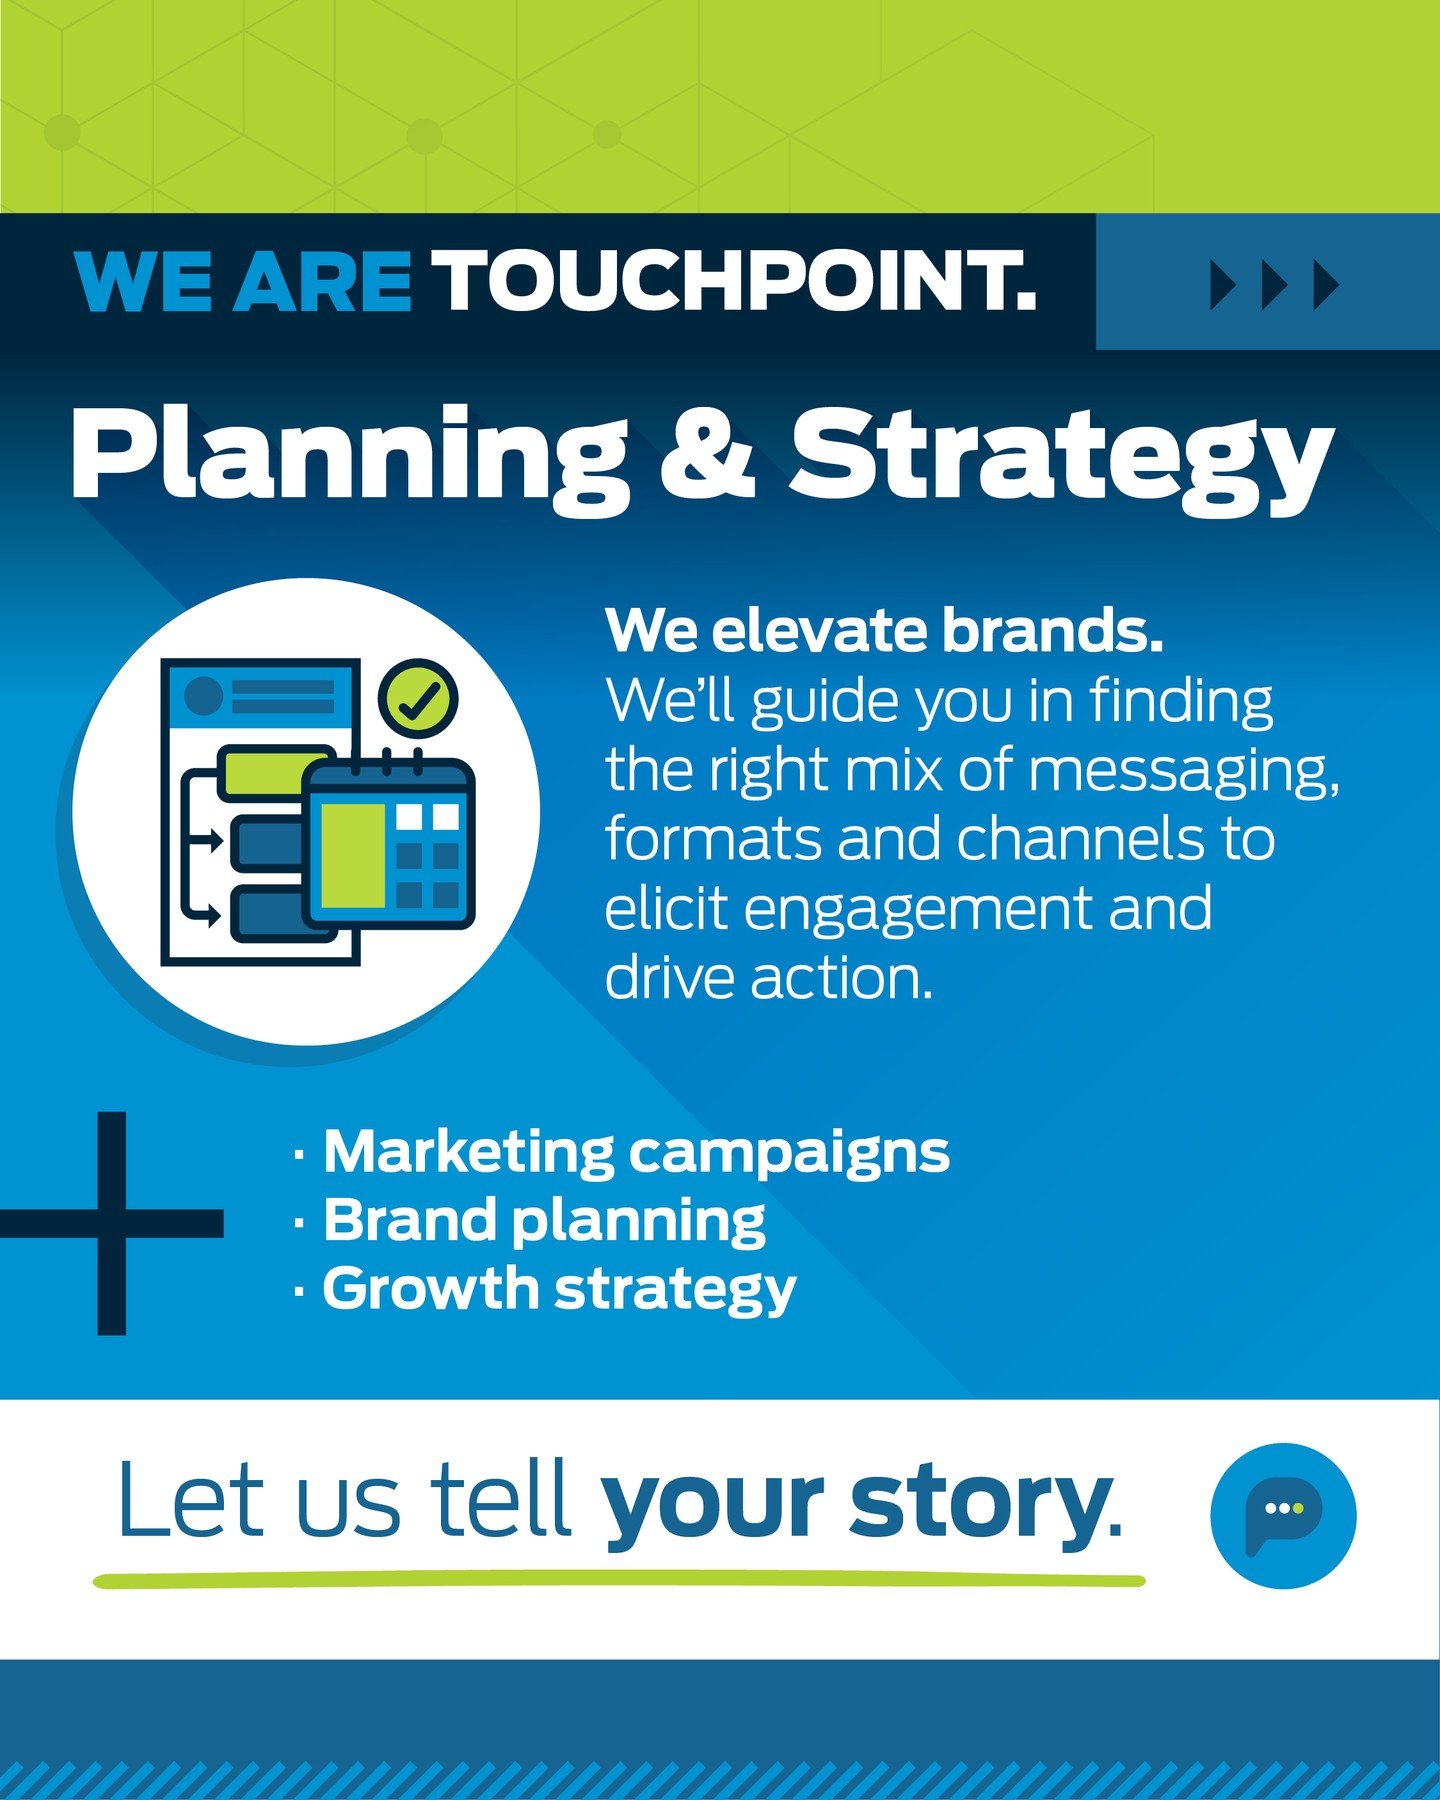 We elevate brands. 
We'll guide you in finding the right mix of messaging, formats and channels to elicit engagement and drive action.

To learn more about our planning and strategy capabilities, visit our website or email laura@touchpointmedia.com t